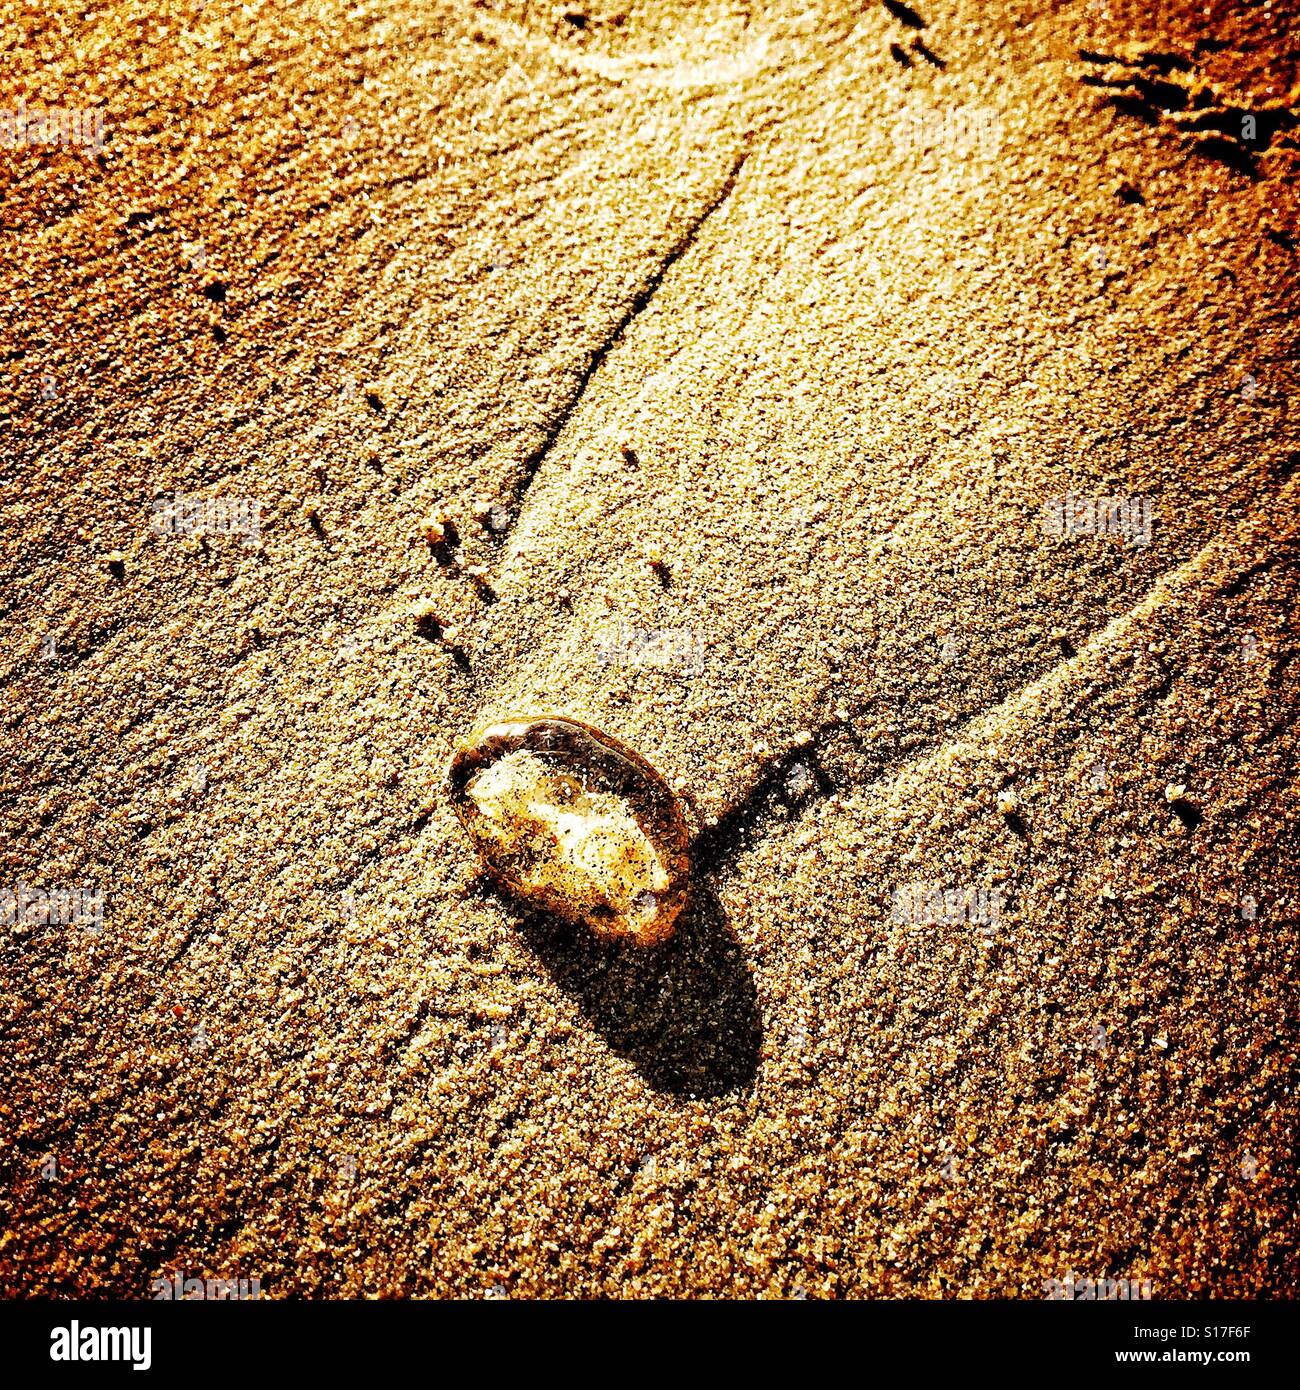 A small clear jellyfish is washed up on the shore of a beach in Nayarit, Mexico. Stock Photo